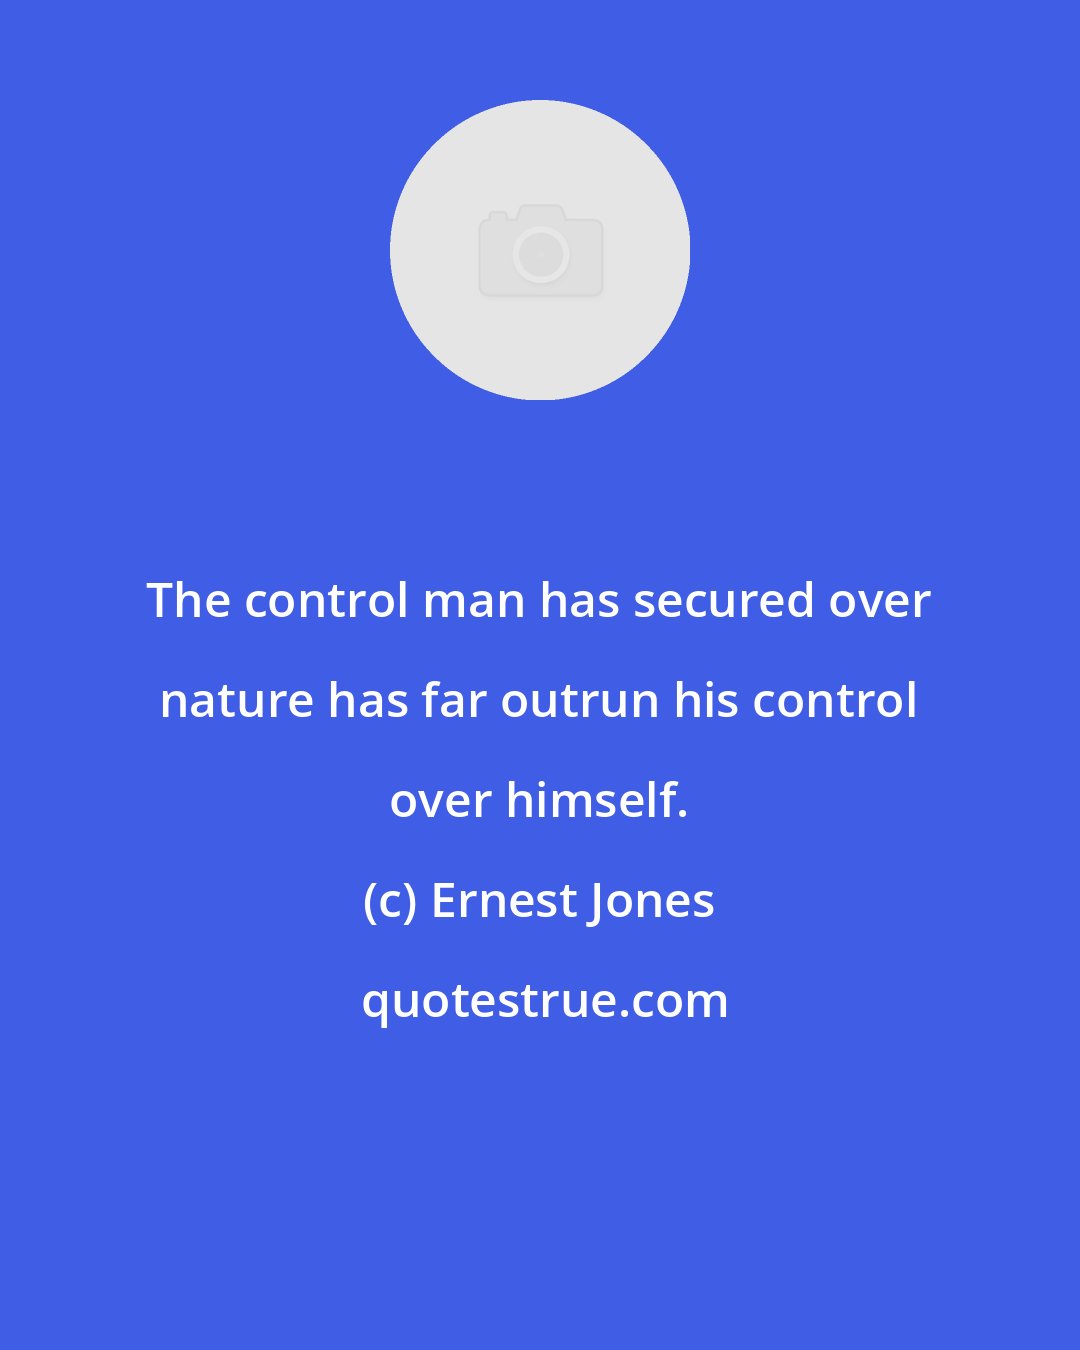 Ernest Jones: The control man has secured over nature has far outrun his control over himself.